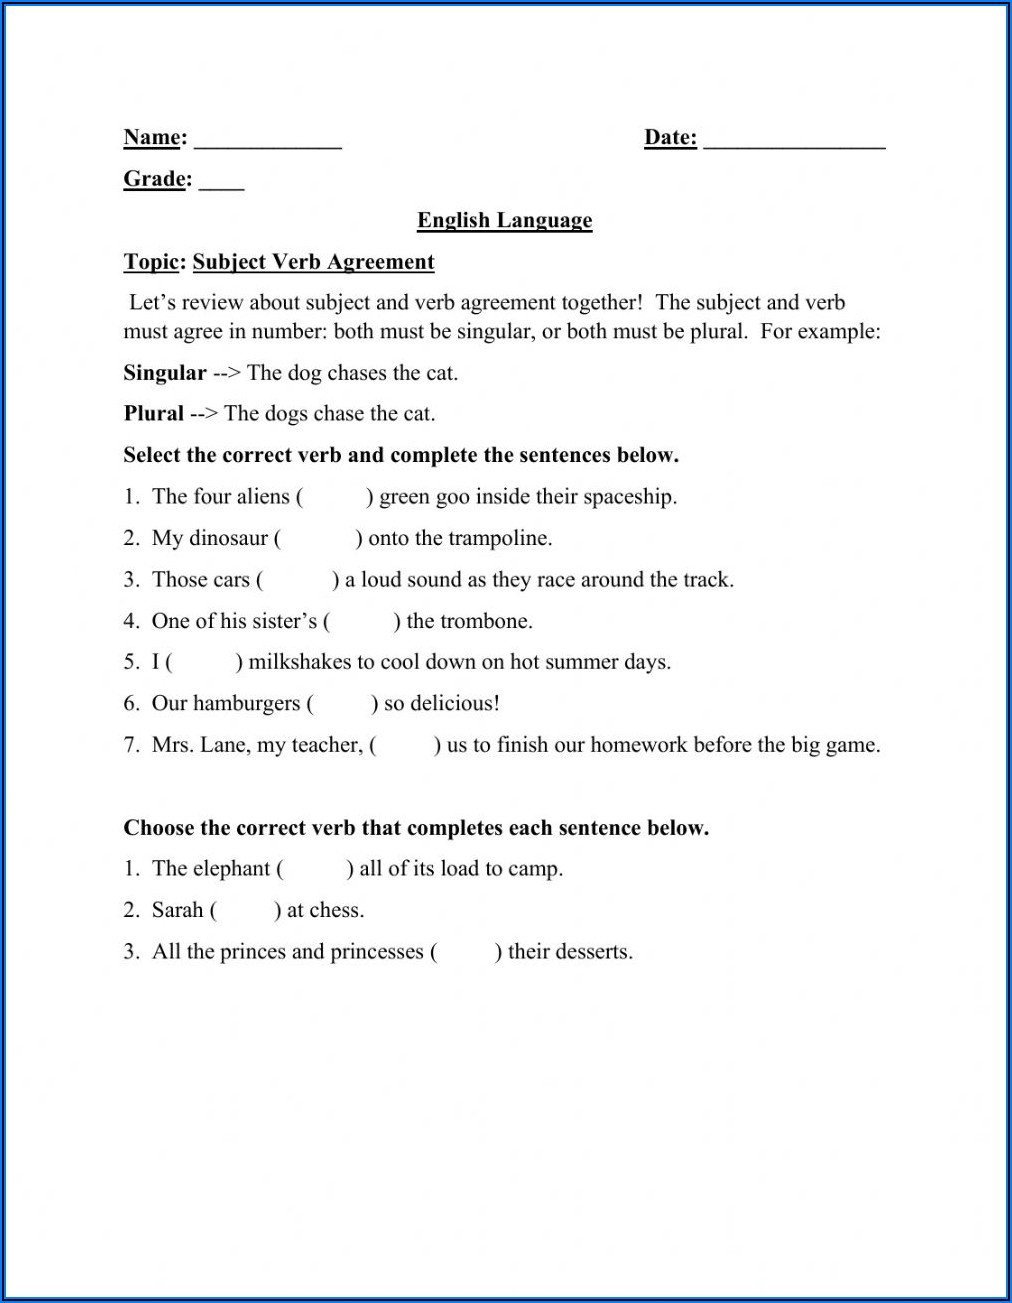 Subject Verb Agreement Worksheets For Grade 6 With Answers Pdf